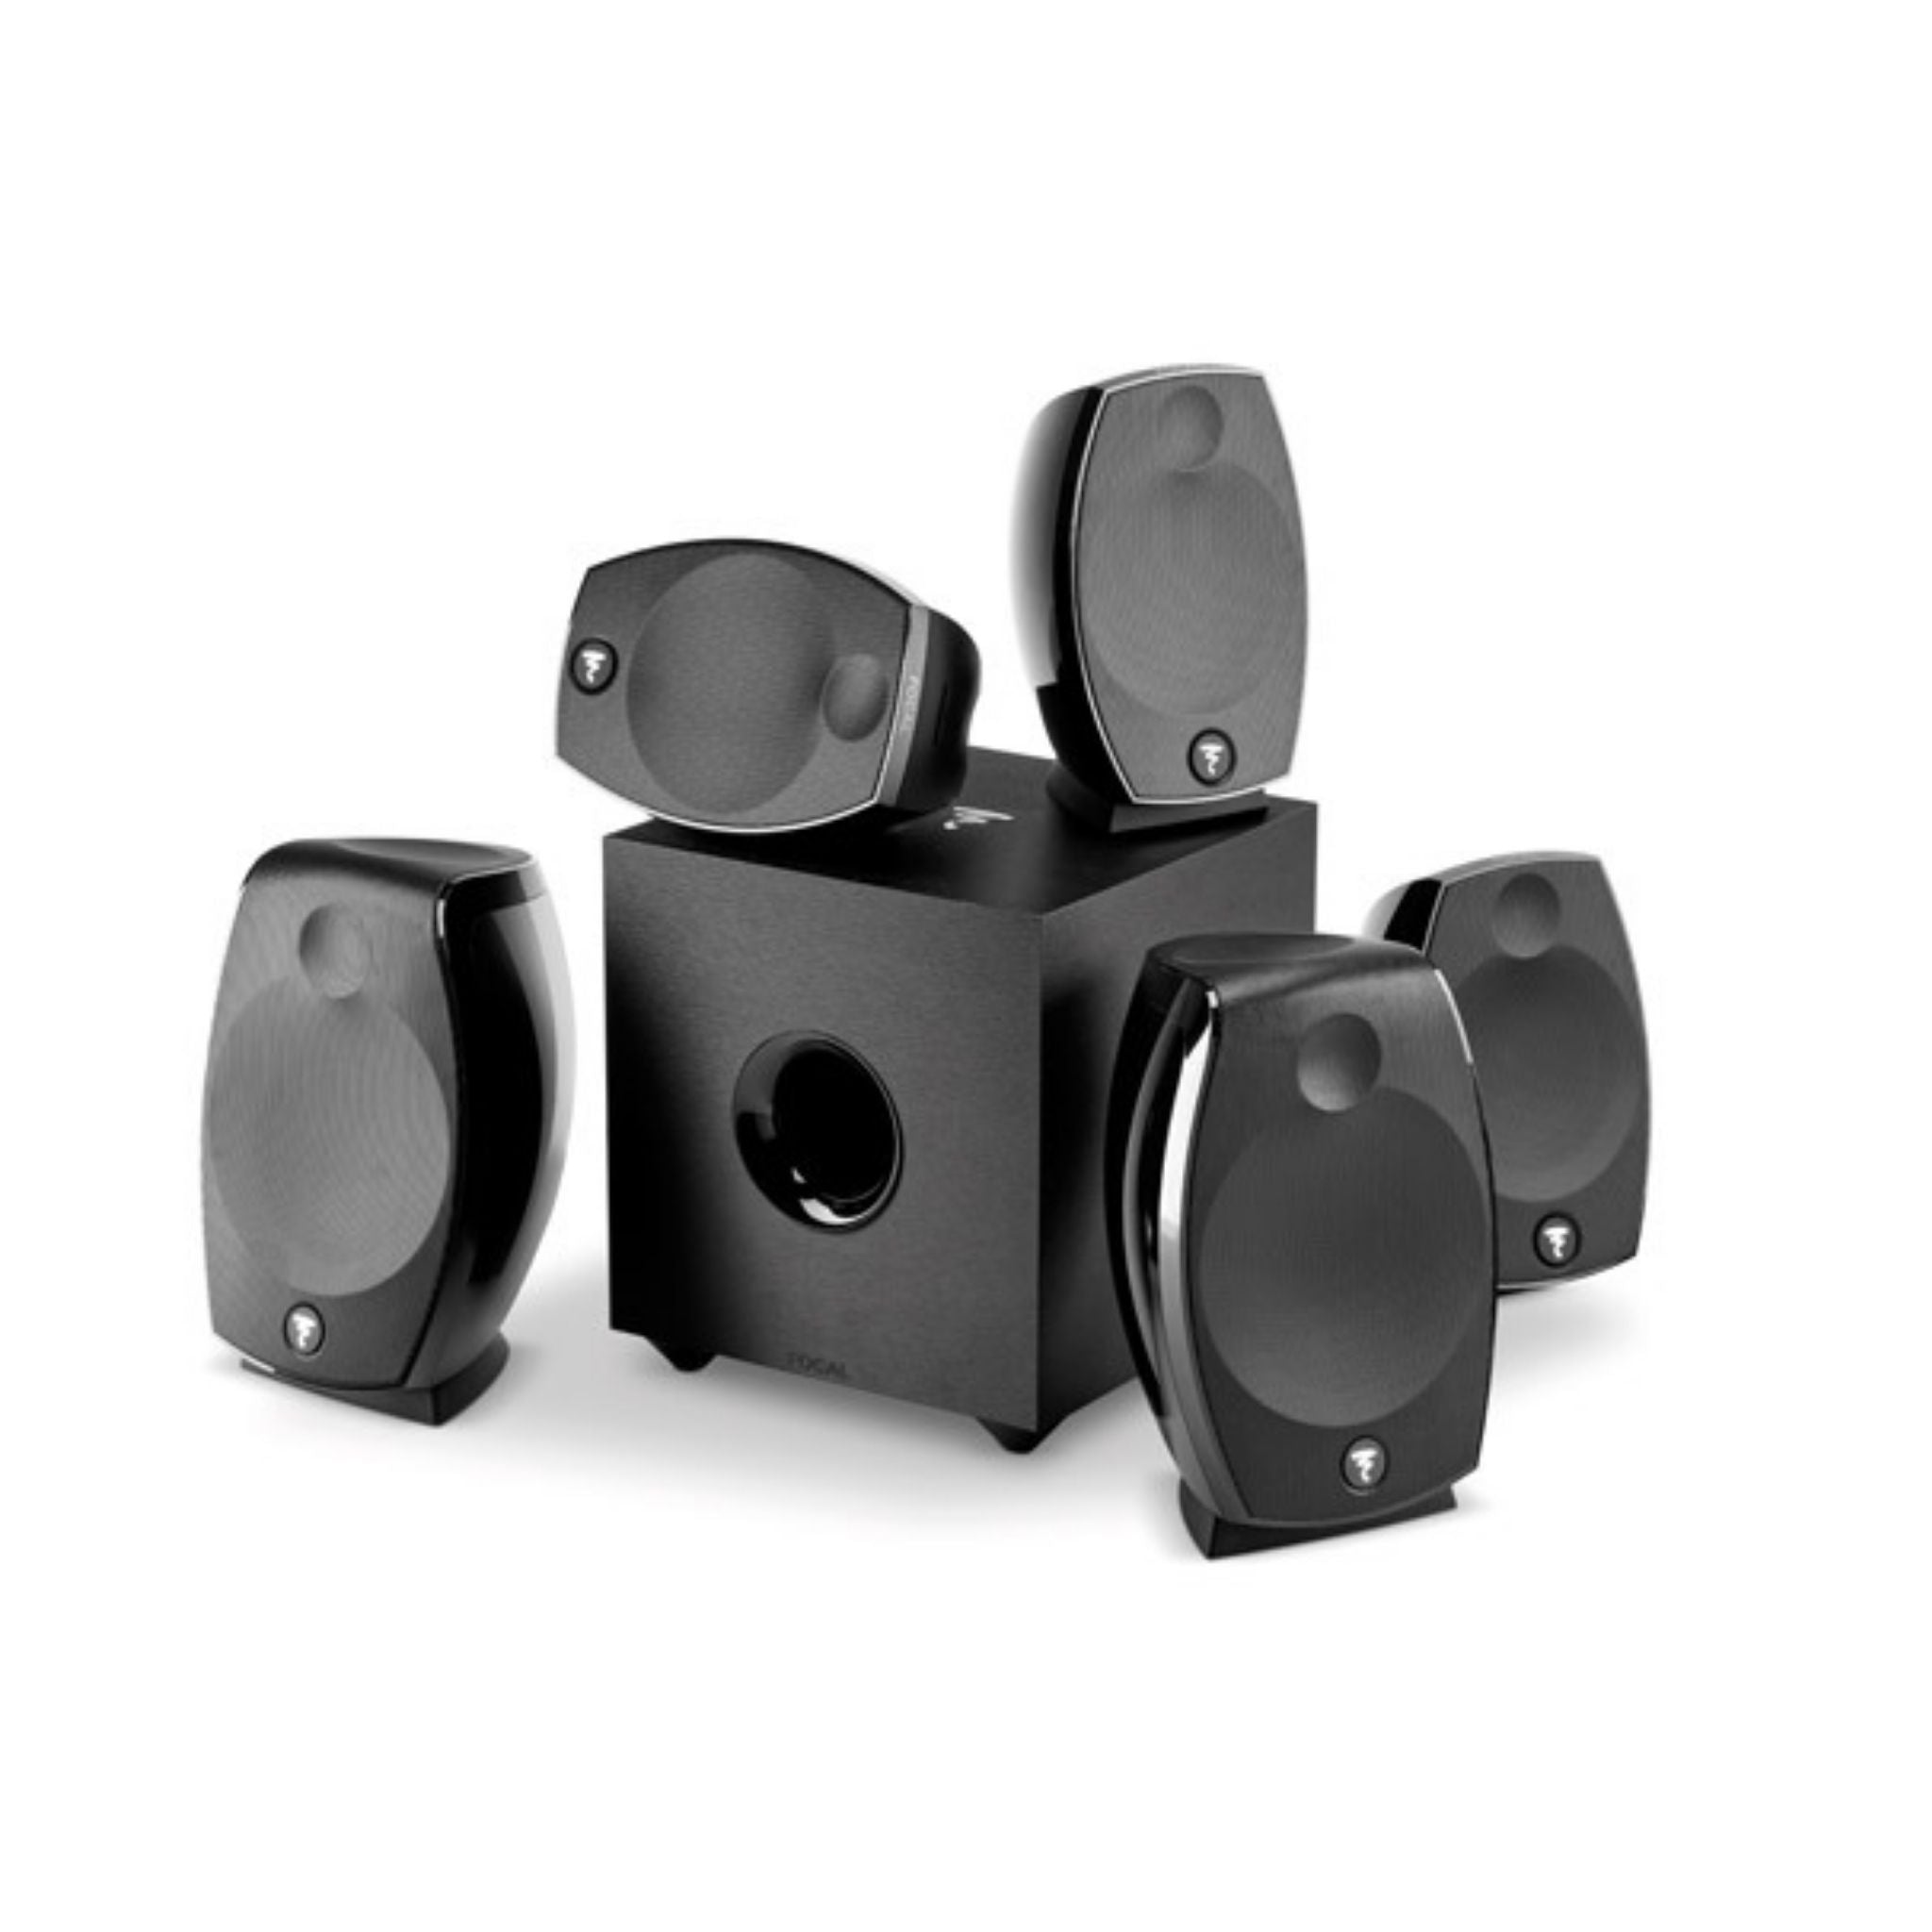 Focal Sib Evo Dolby Atmos 5.1.2 - Home Theater System, Focal, Home Theater Systems - AVStore.in